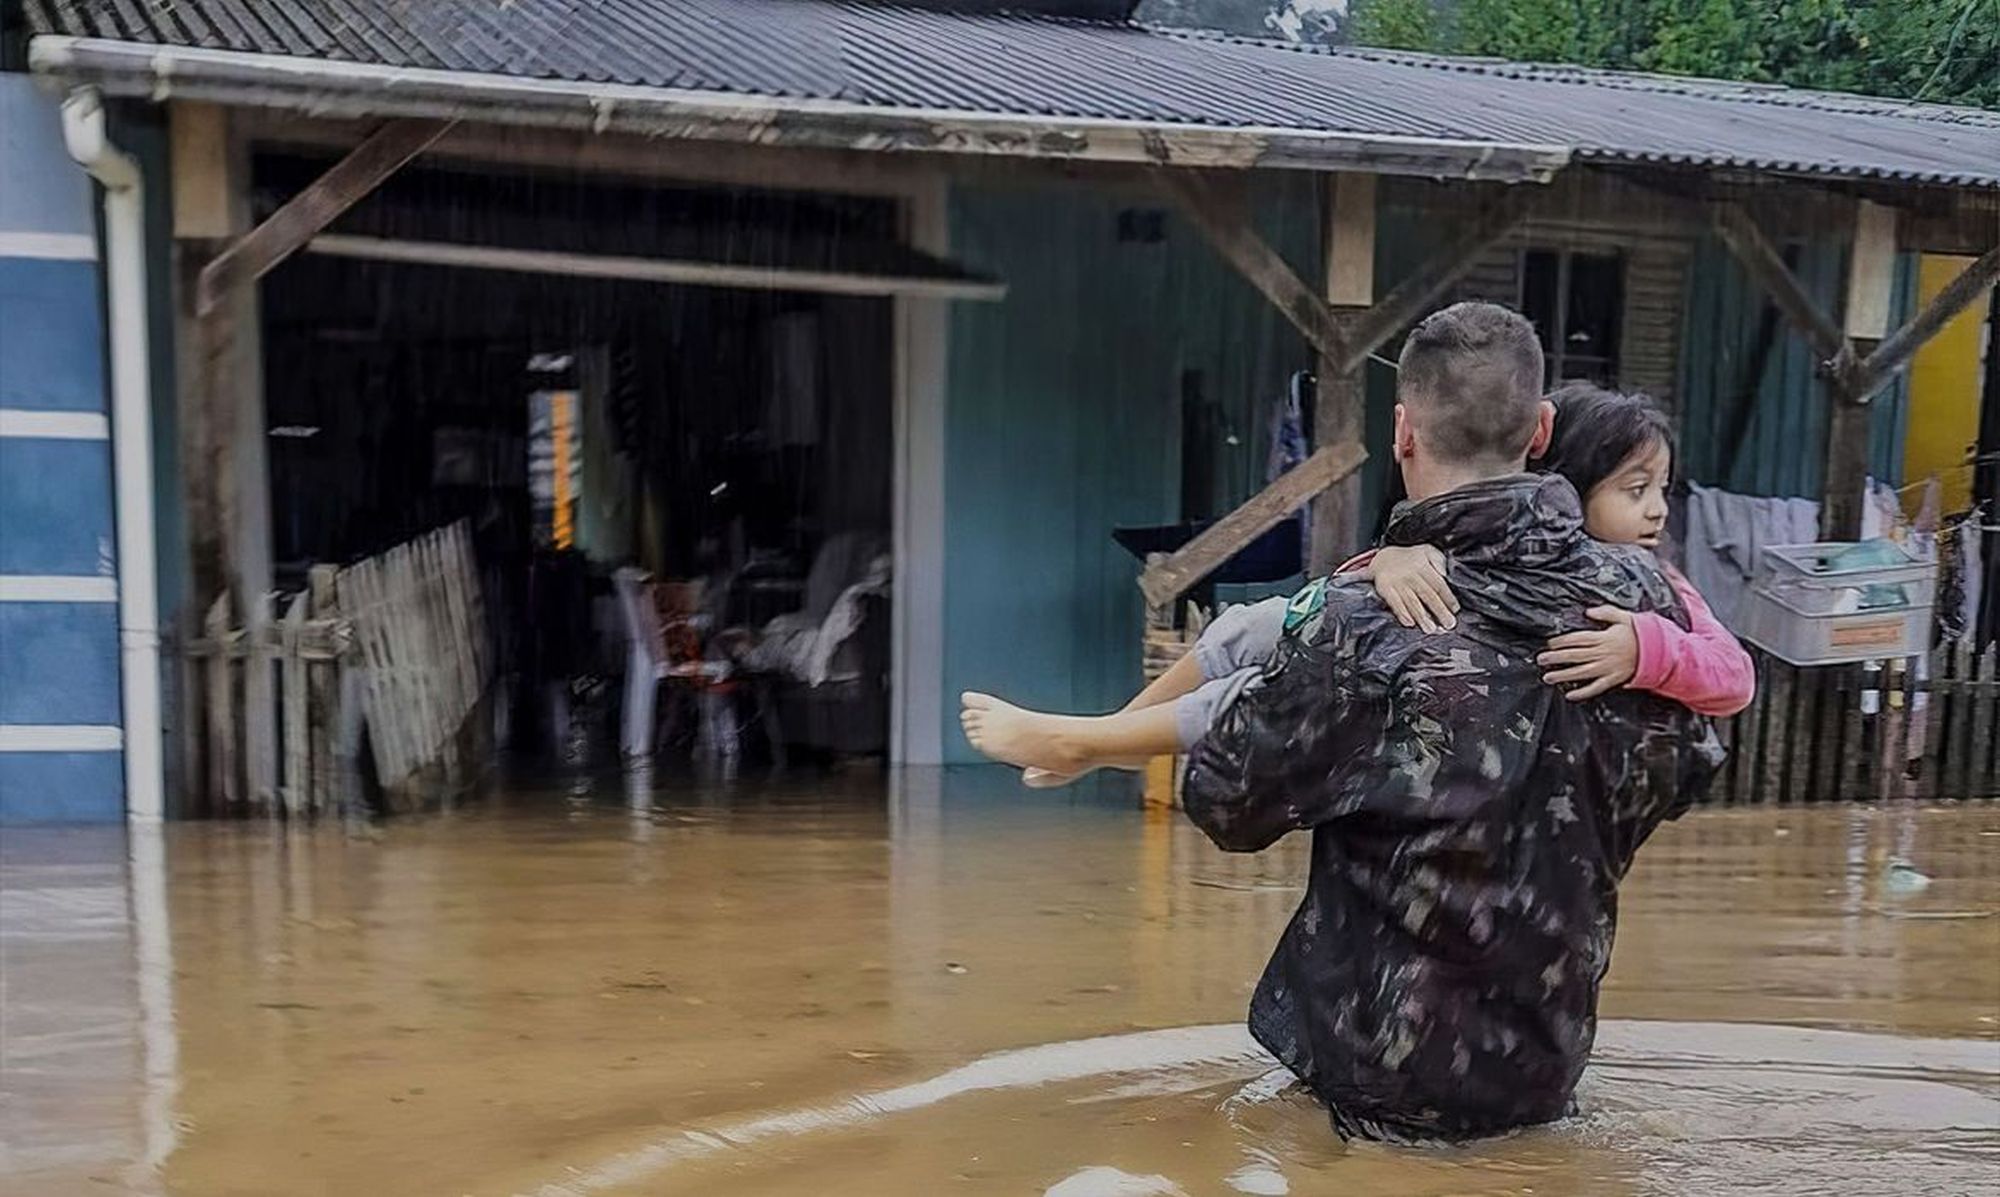 Hundreds of thousands of homes in Rio Grande do Sul were left with no power or drinking water